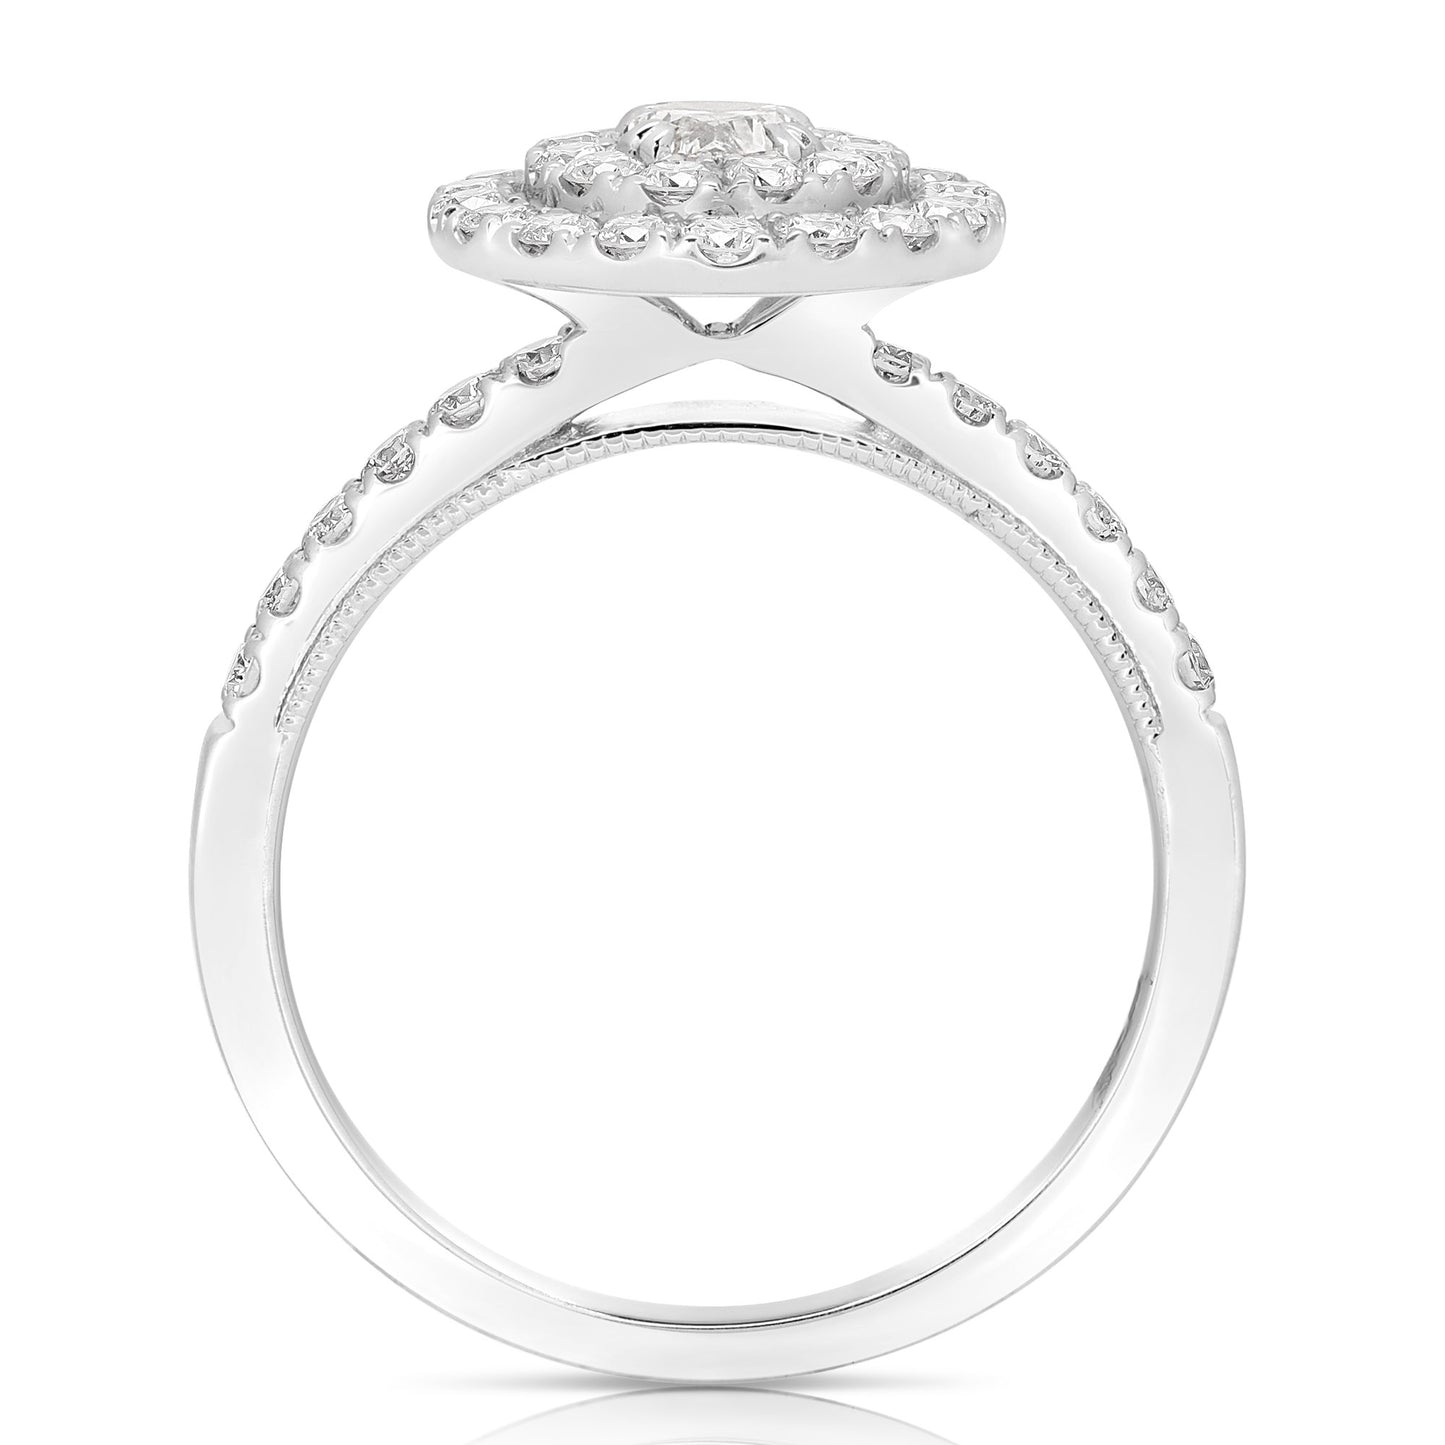 1/3 CT CENTER OVAL D-HALO 1 CTW DIAMOND ENGAGEMENT RING